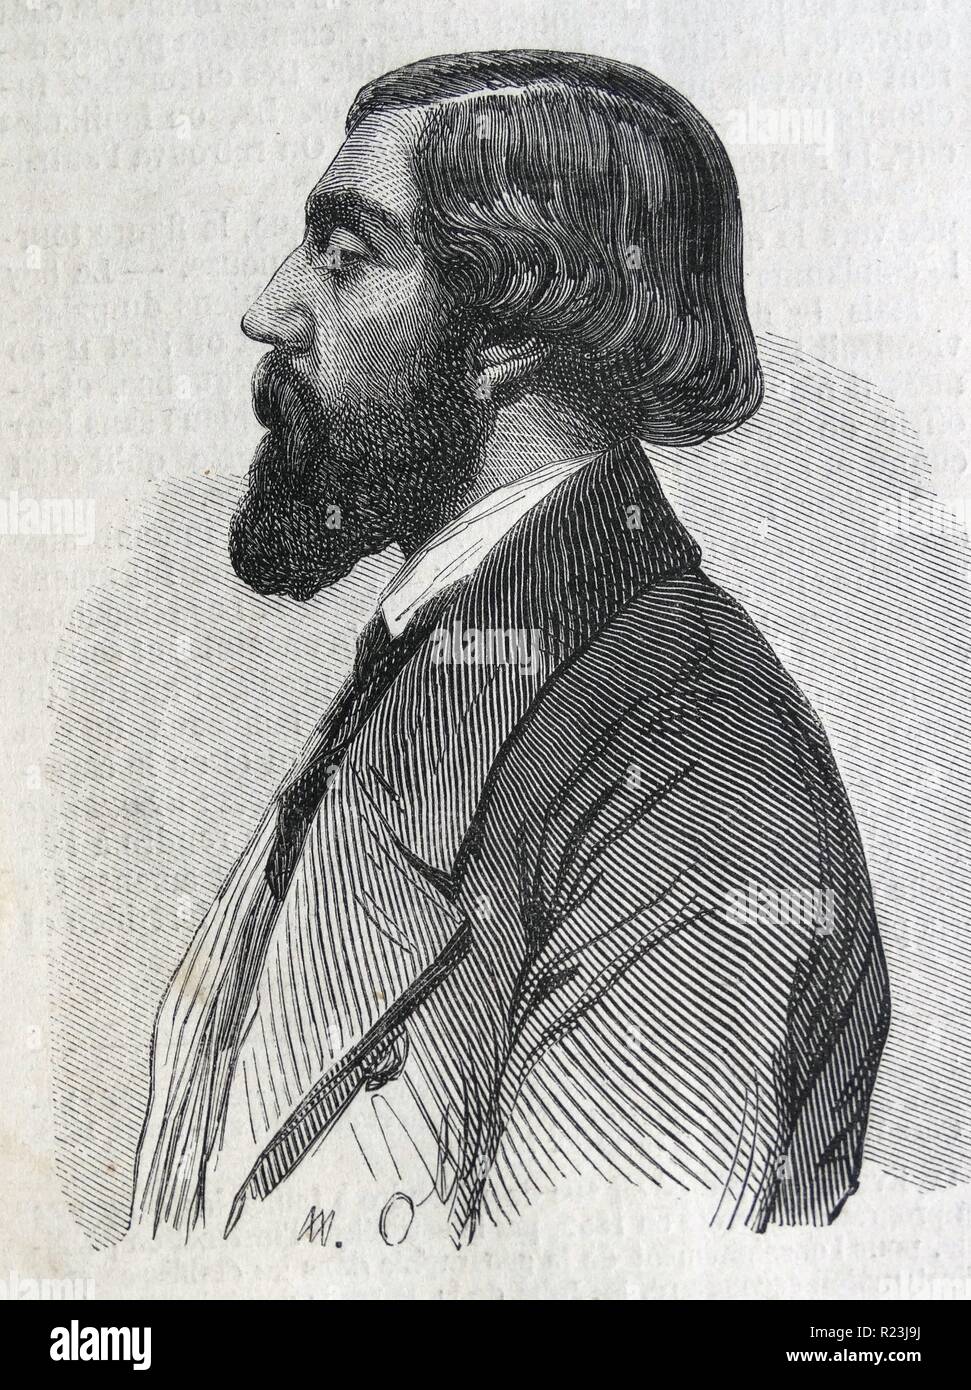 Illustration of Charles-Emile Reynaud (1844-1918) a French inventor, responsible for the first projected animated cartoons. 1877 Stock Photo